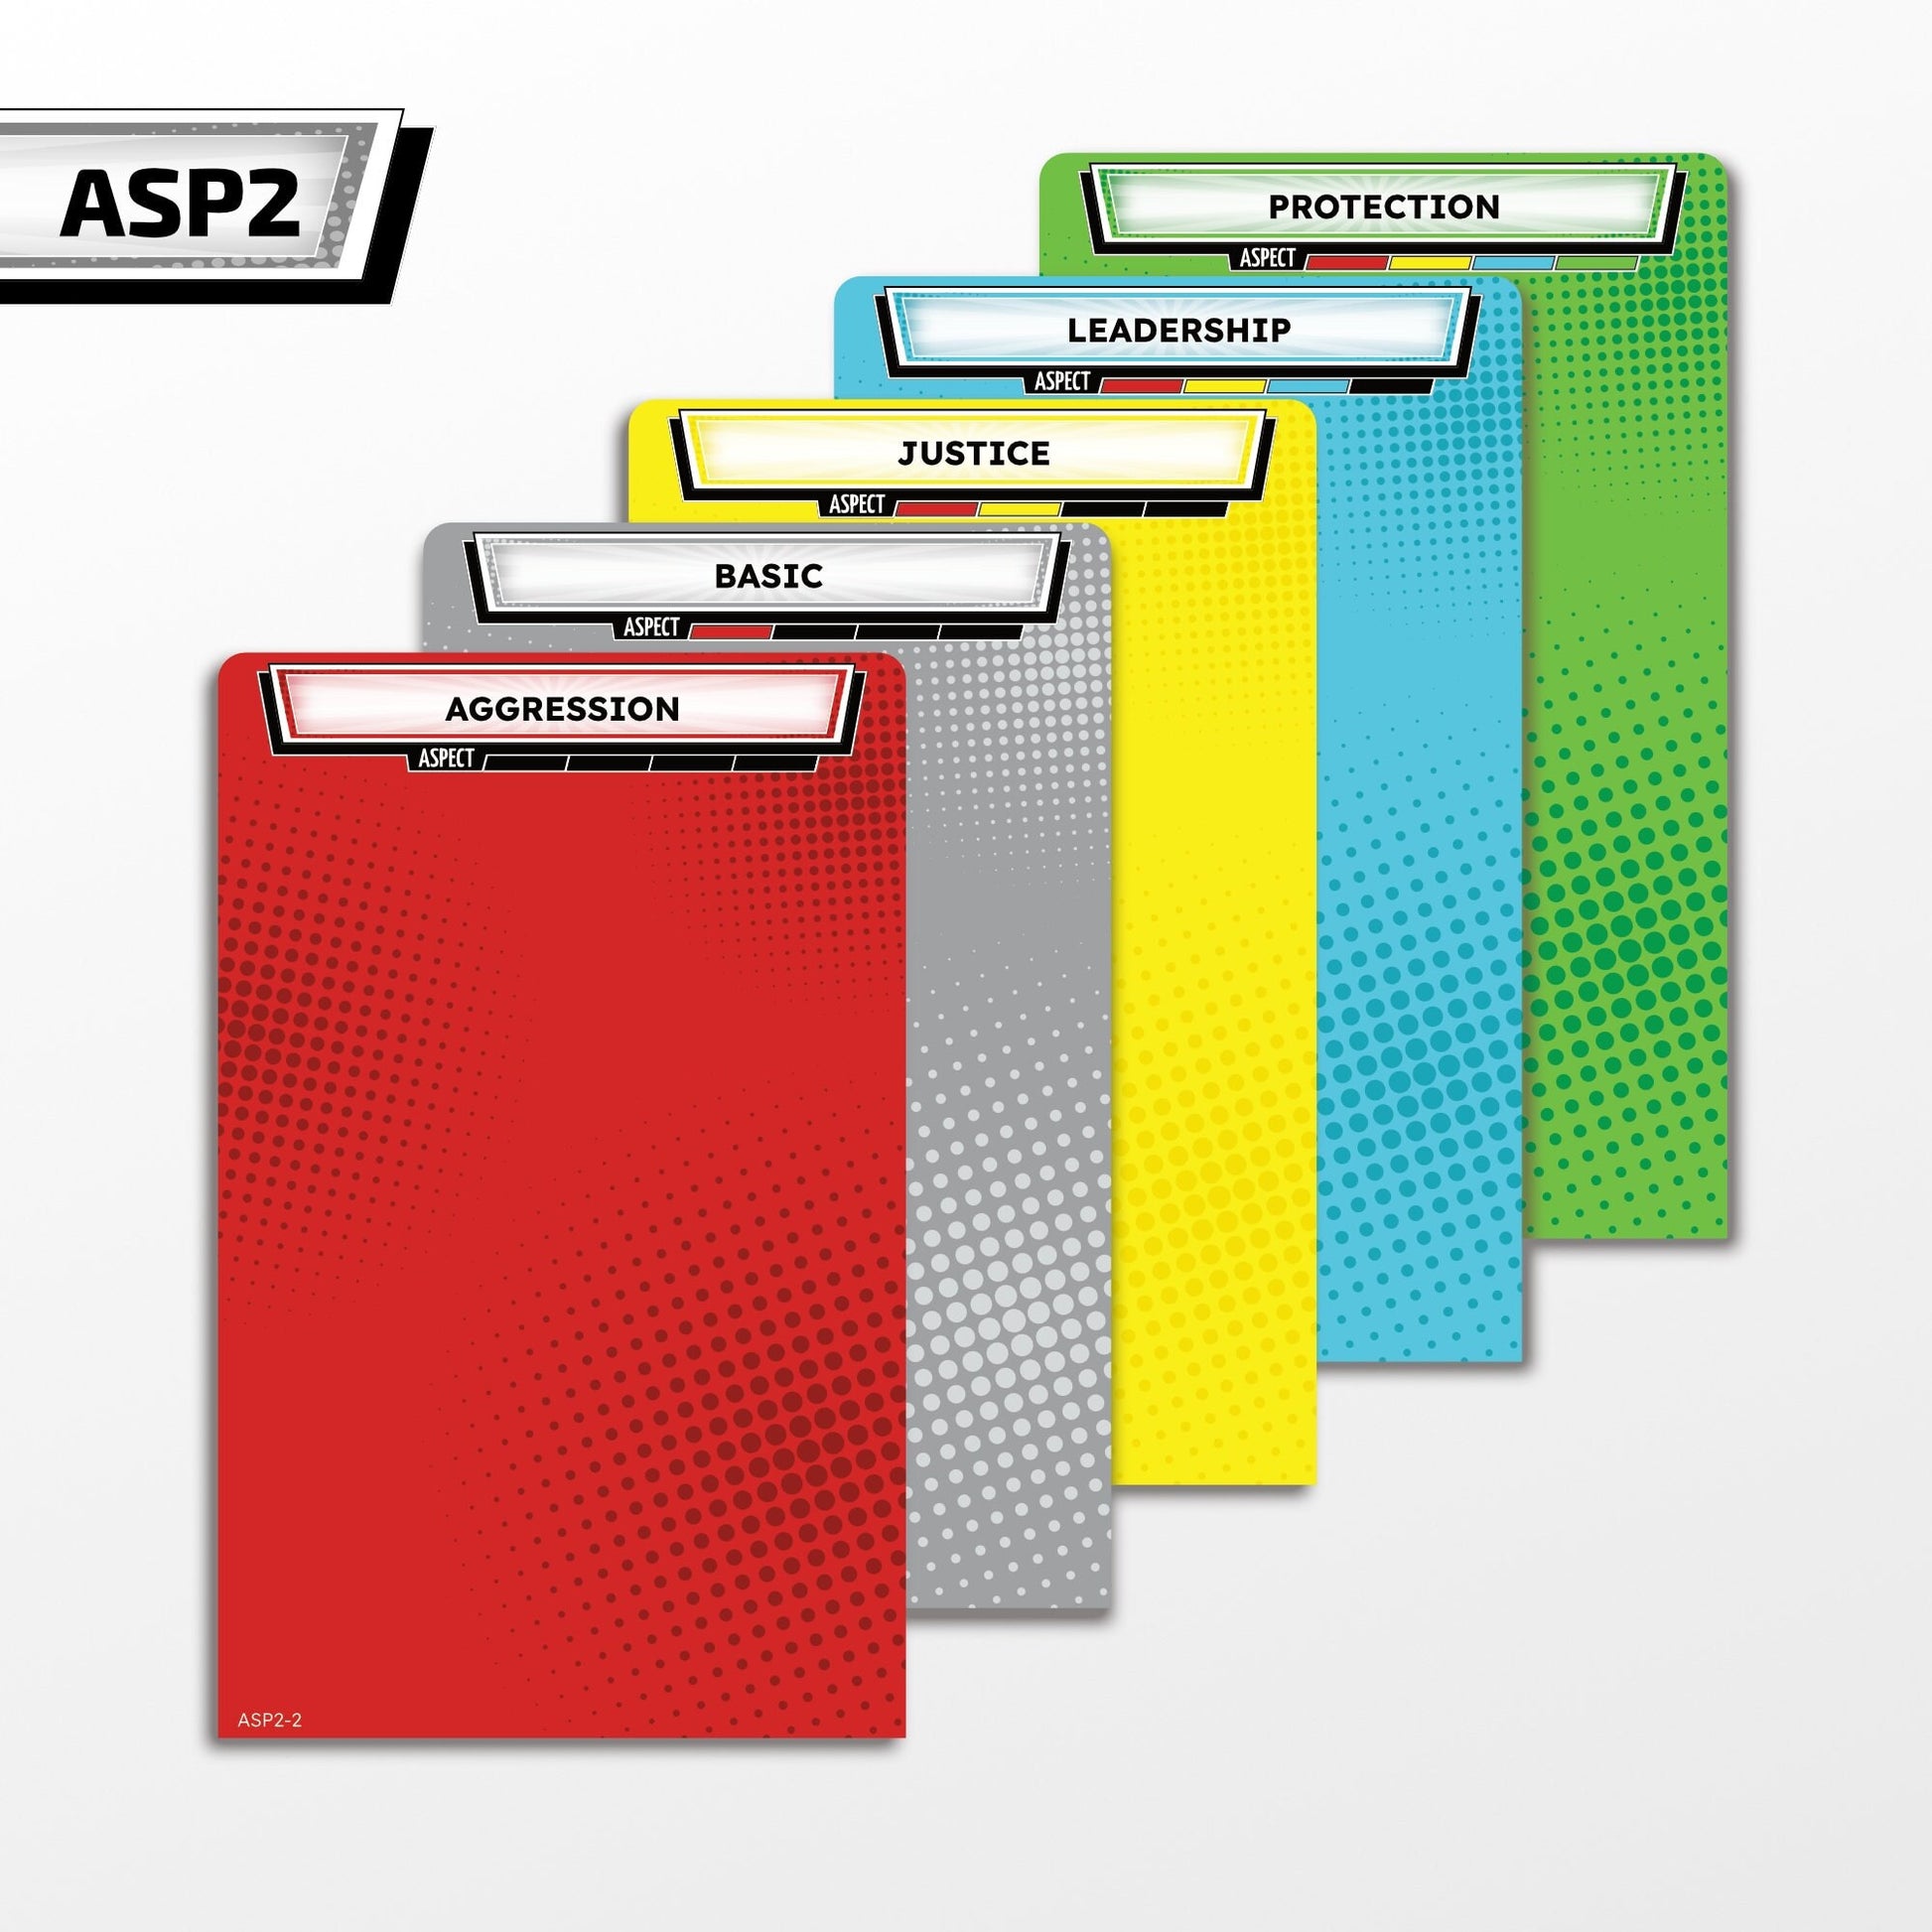 Aspect Dividers - Marvel Champions Dividers - Aspects Arranged by Sub-Aspects OR Energy Level - 30pcs (ASP1/ASP2) + 2 Extra for Free